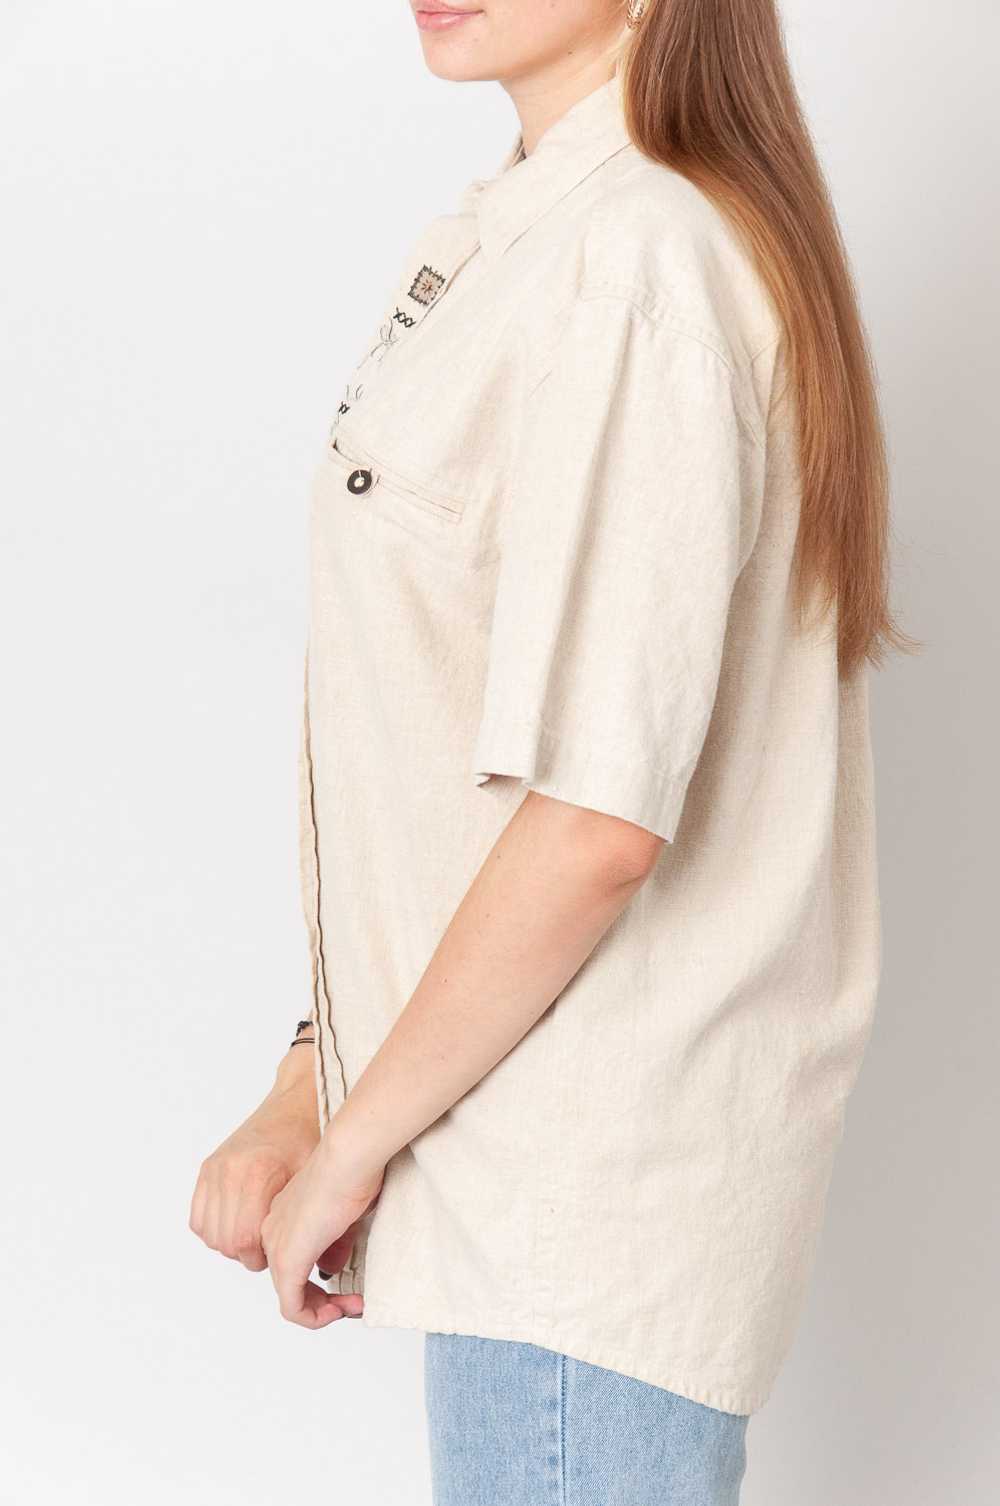 Edelweiss short sleeve shirt Beige With Stick - image 5